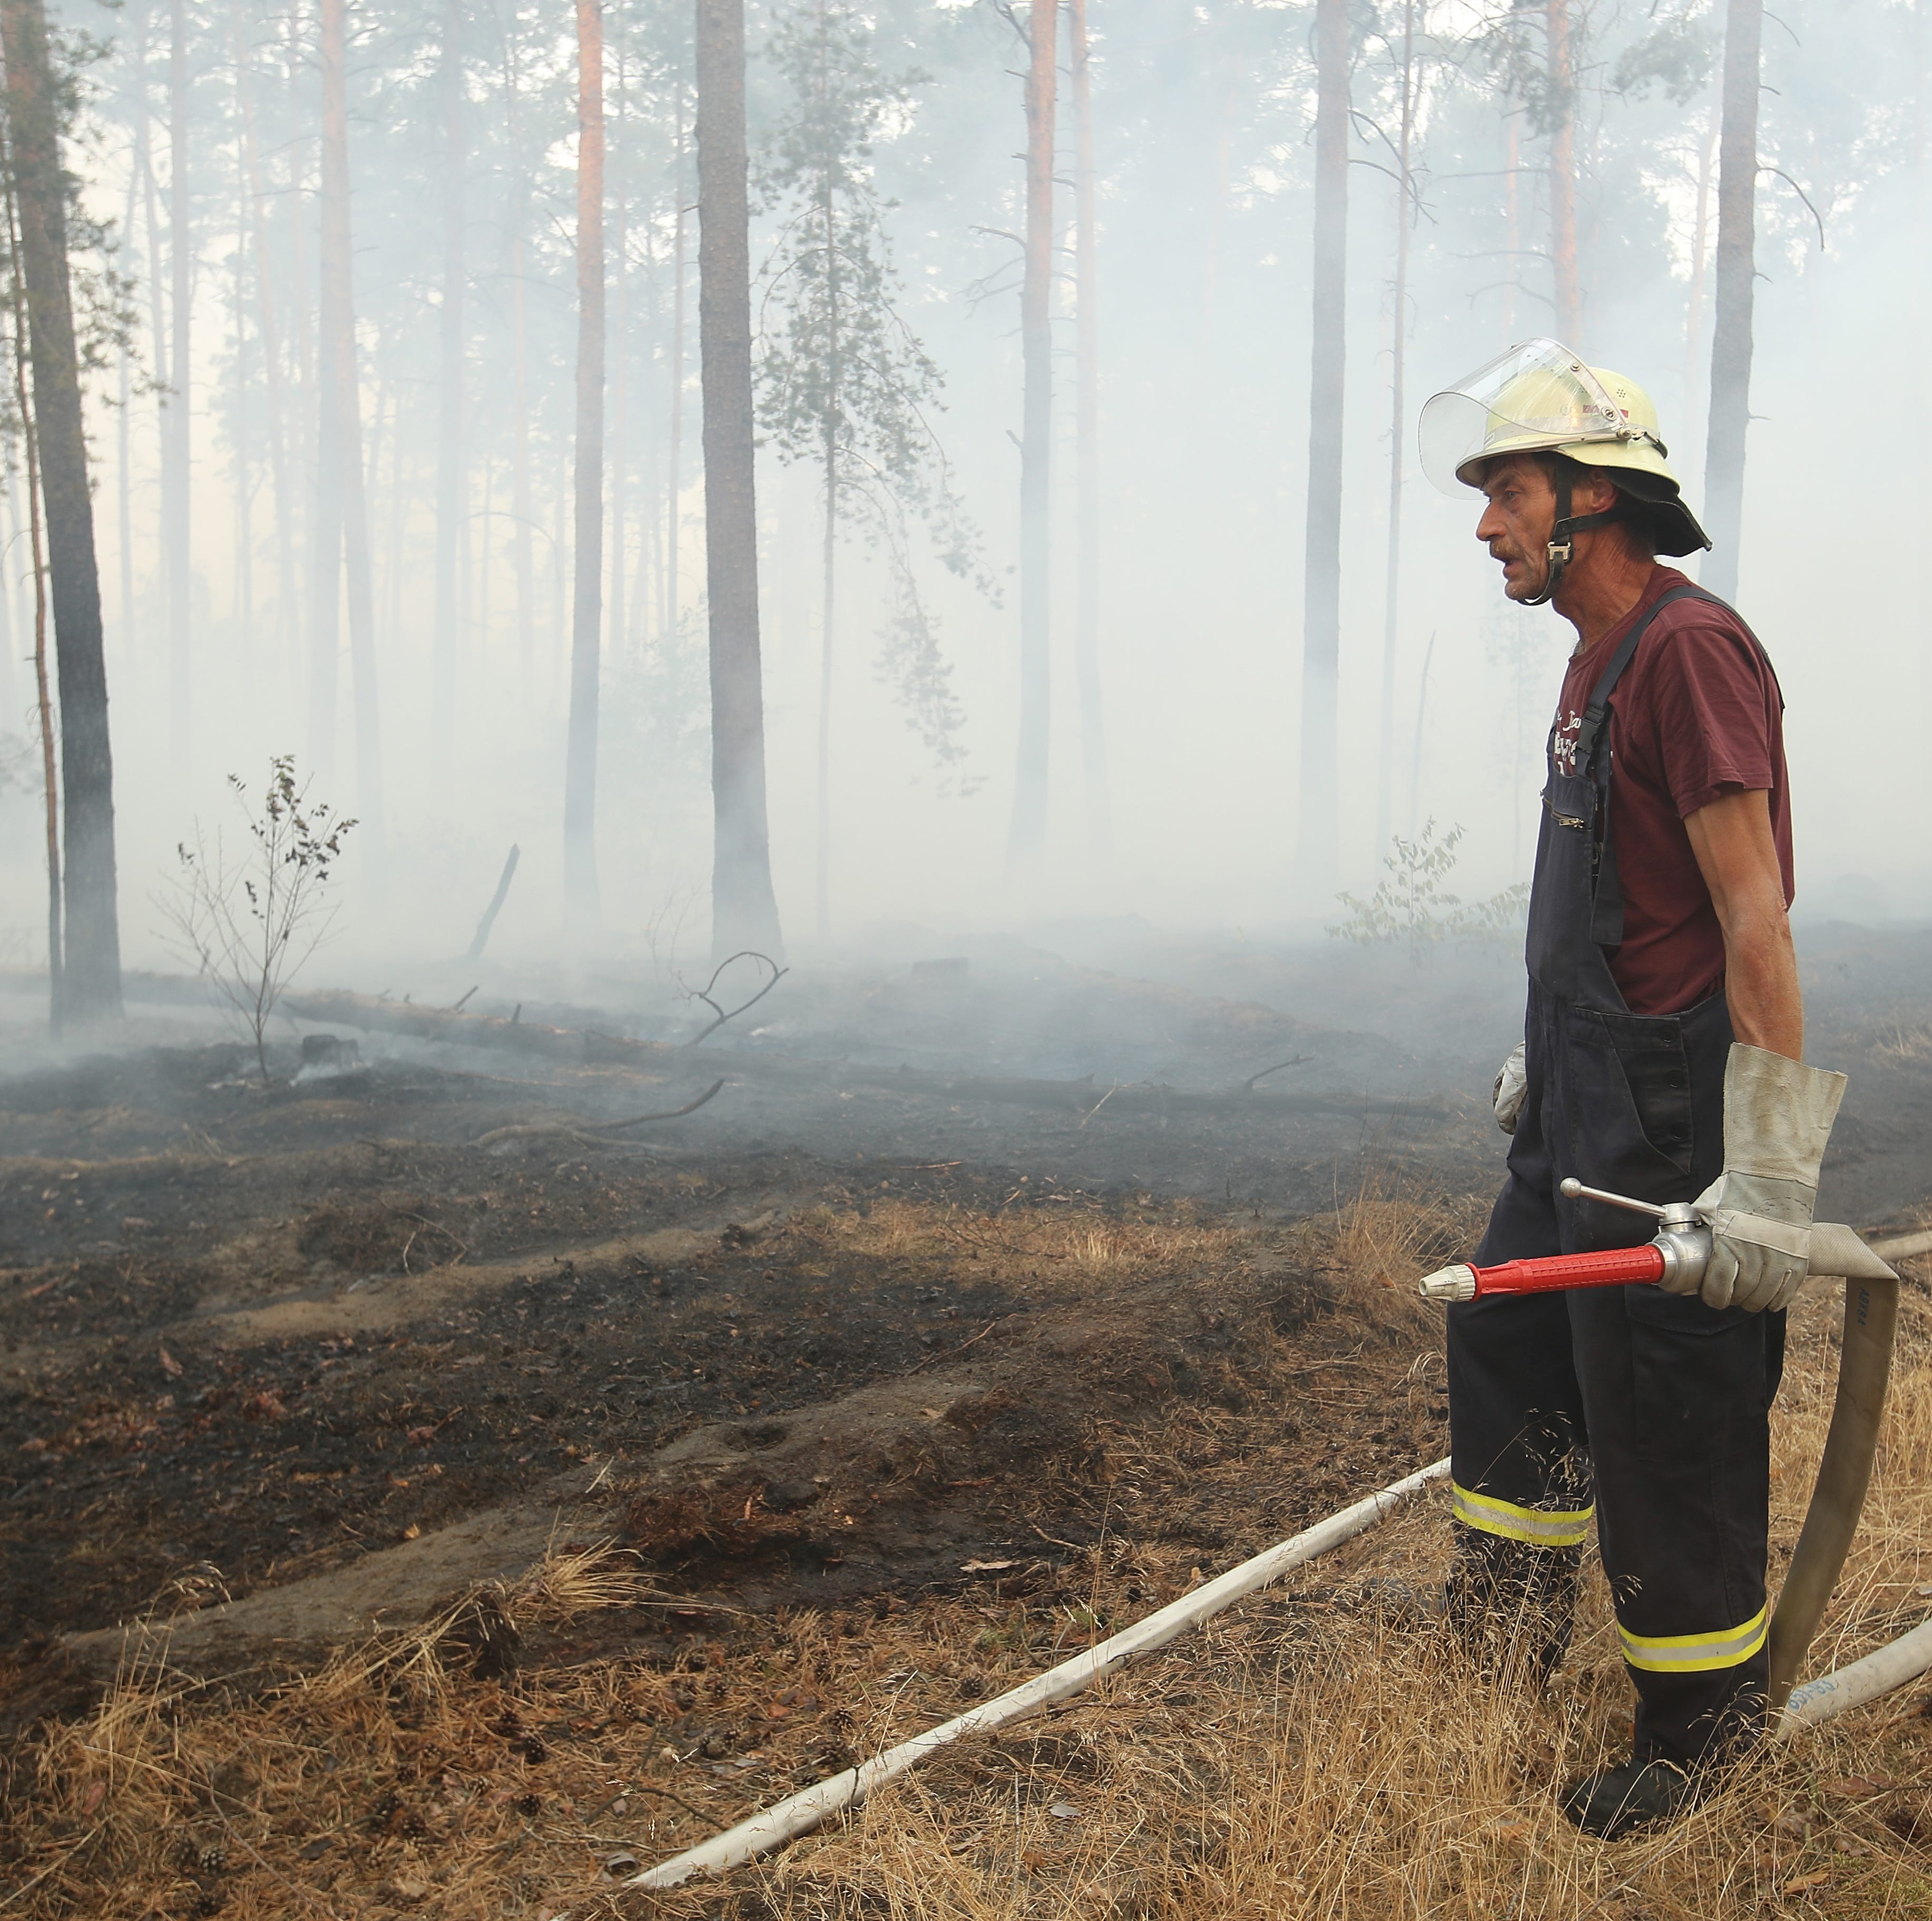 A fireman stands among smoke in a section of burning forest in southern Brandenburg state on August 24, 2018 near Klausdorf, Germany.